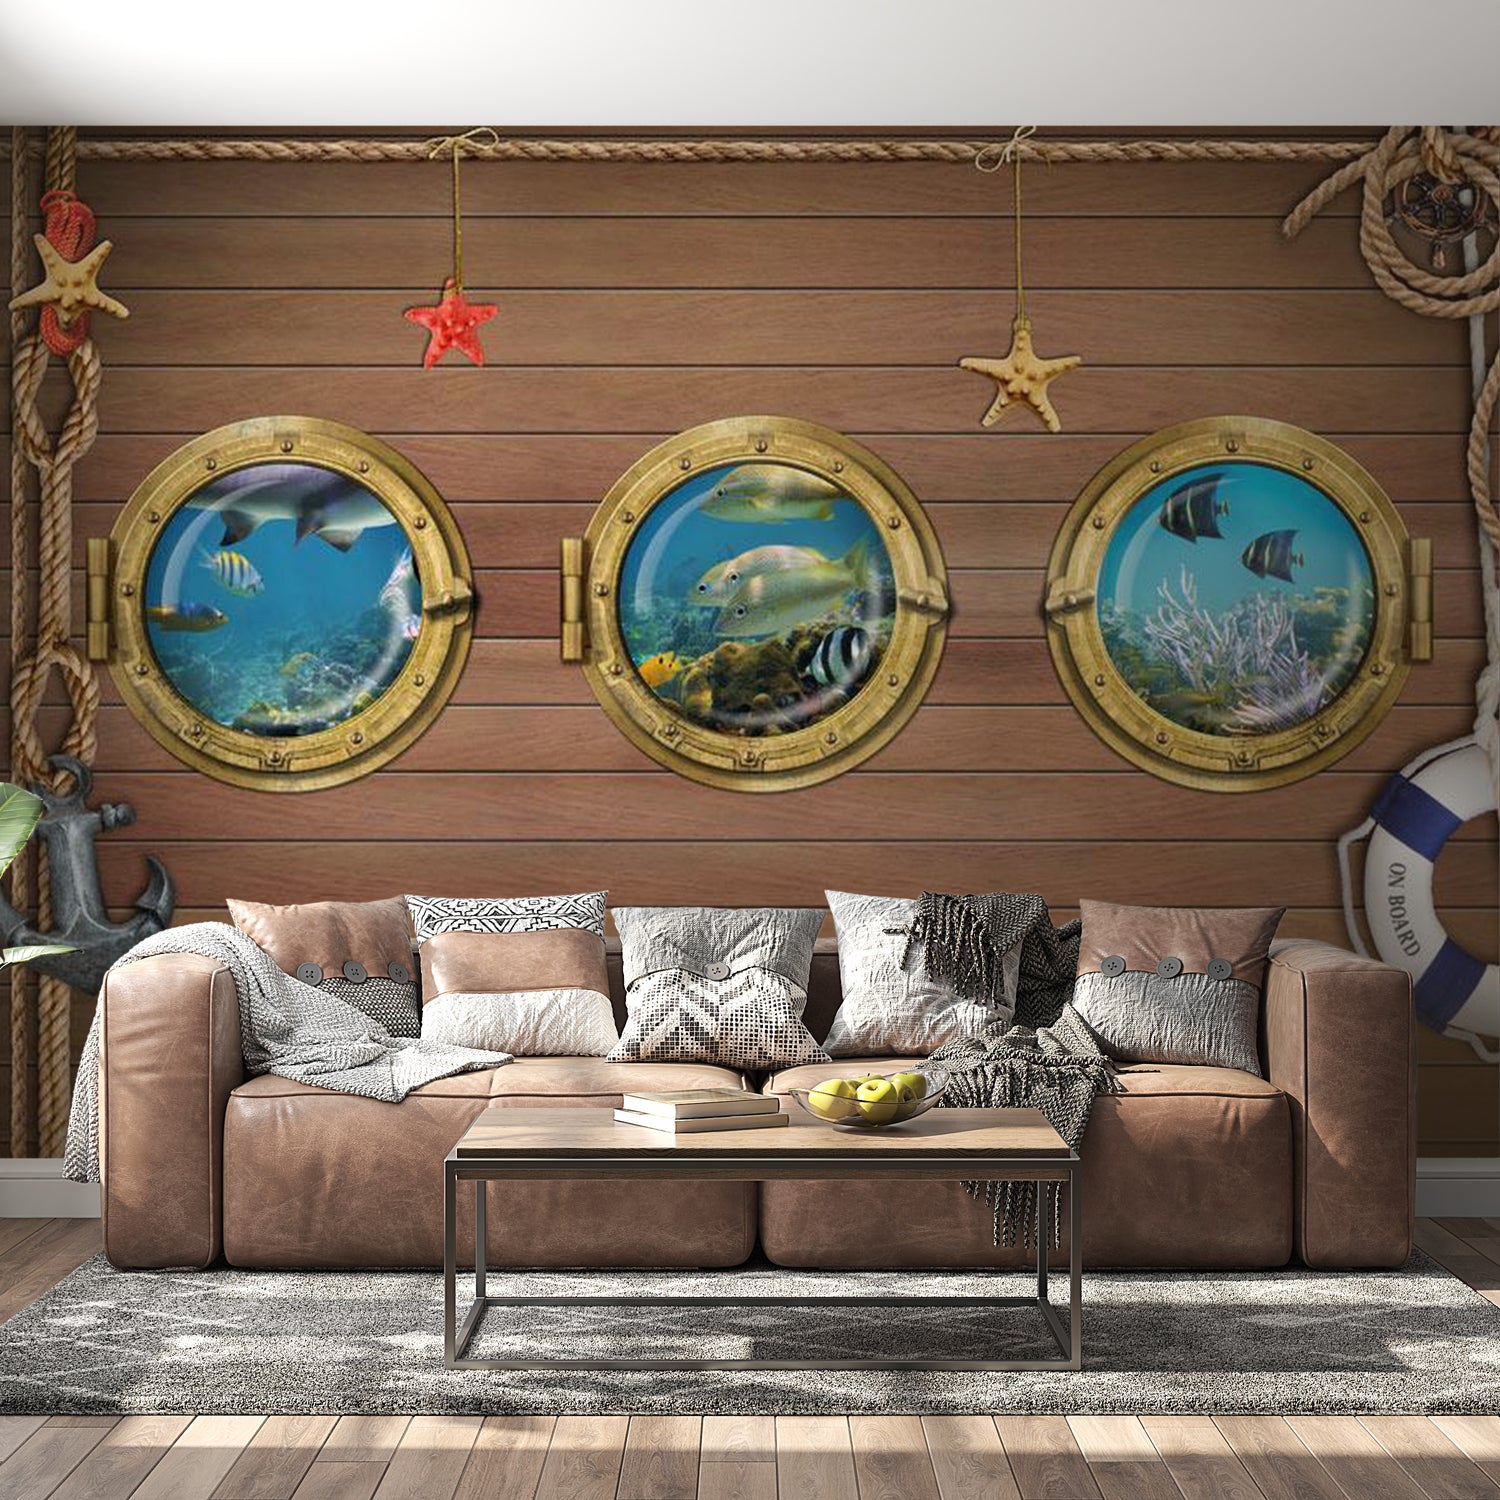 Peel & Stick Animal Wall Mural - Coastal Portholes on Wood - Removable Wall Decals